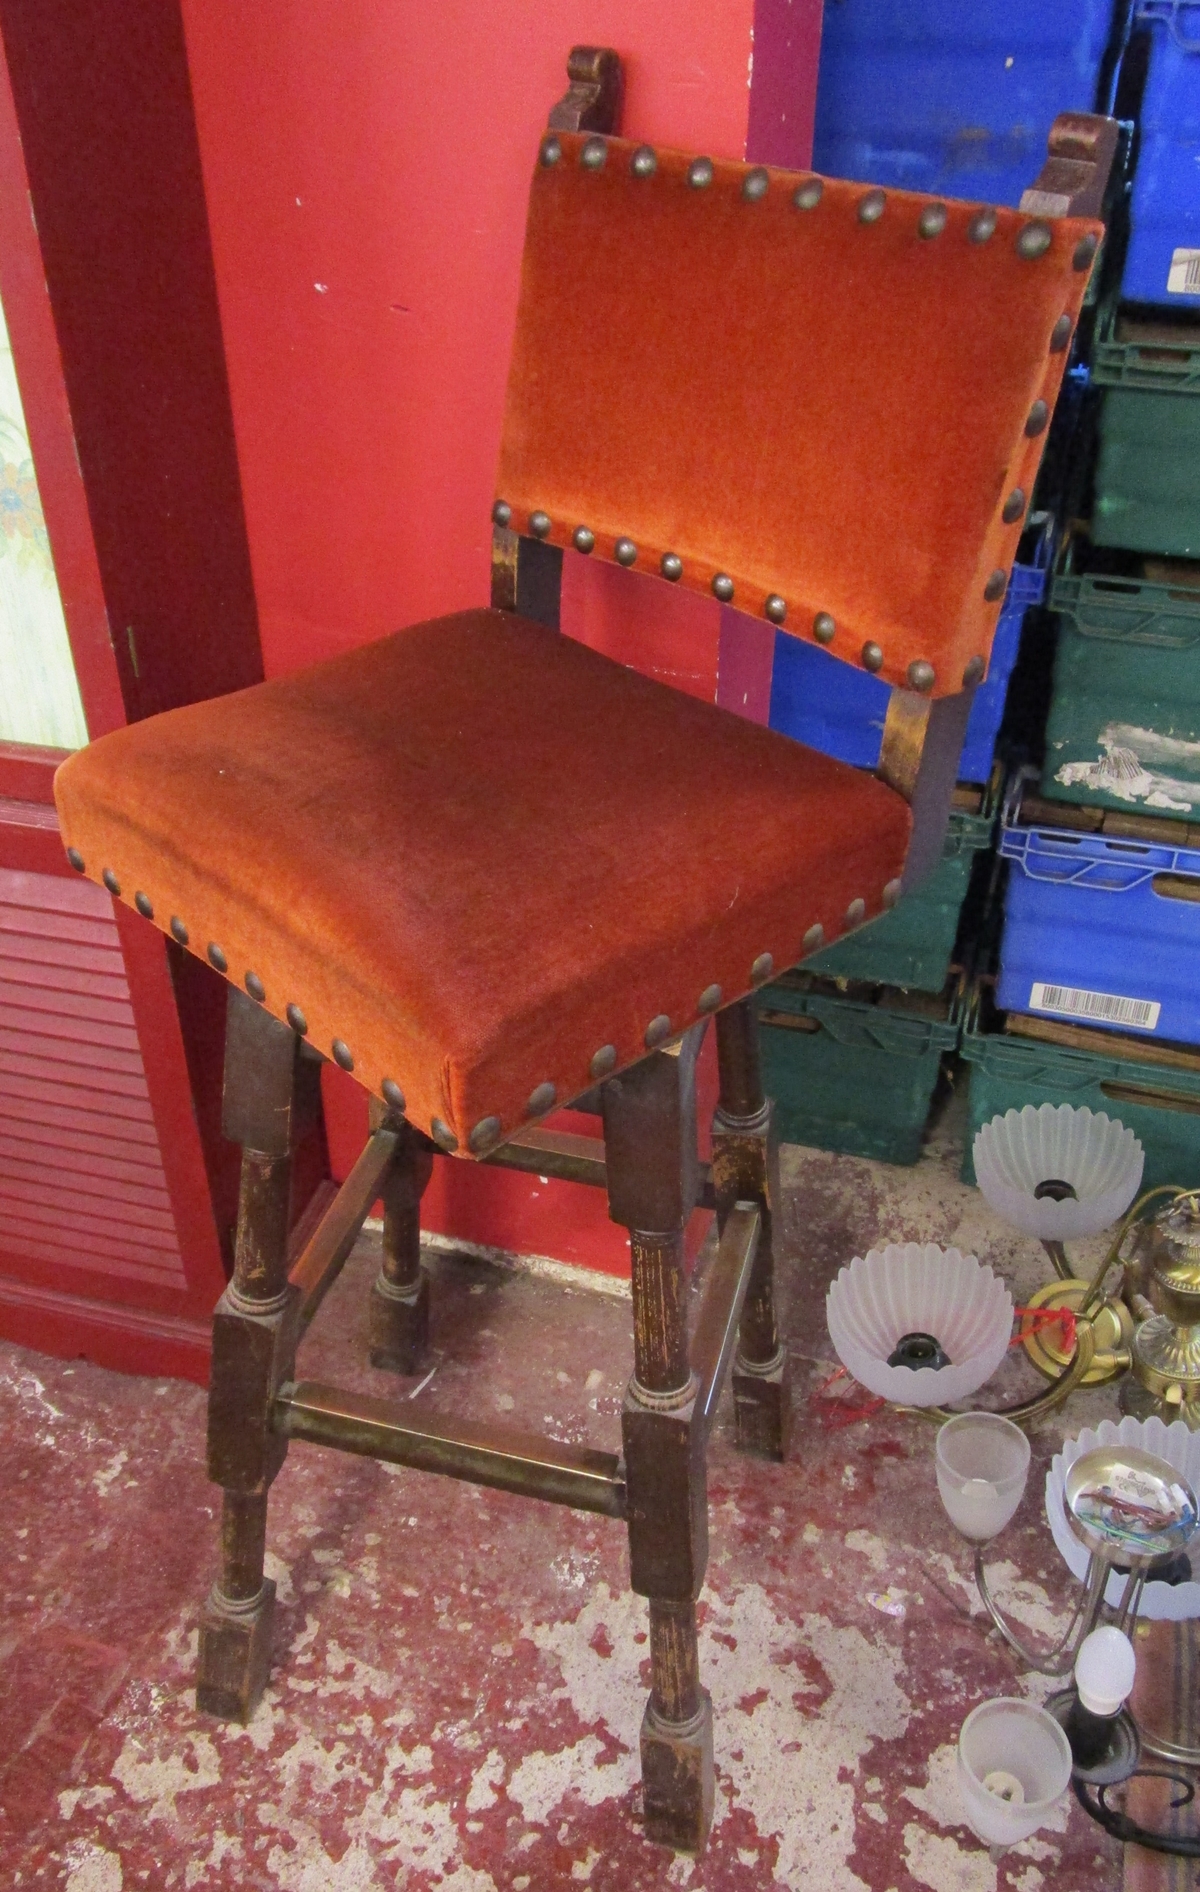 Our old auctioneer's stool (used for last 40 years)!